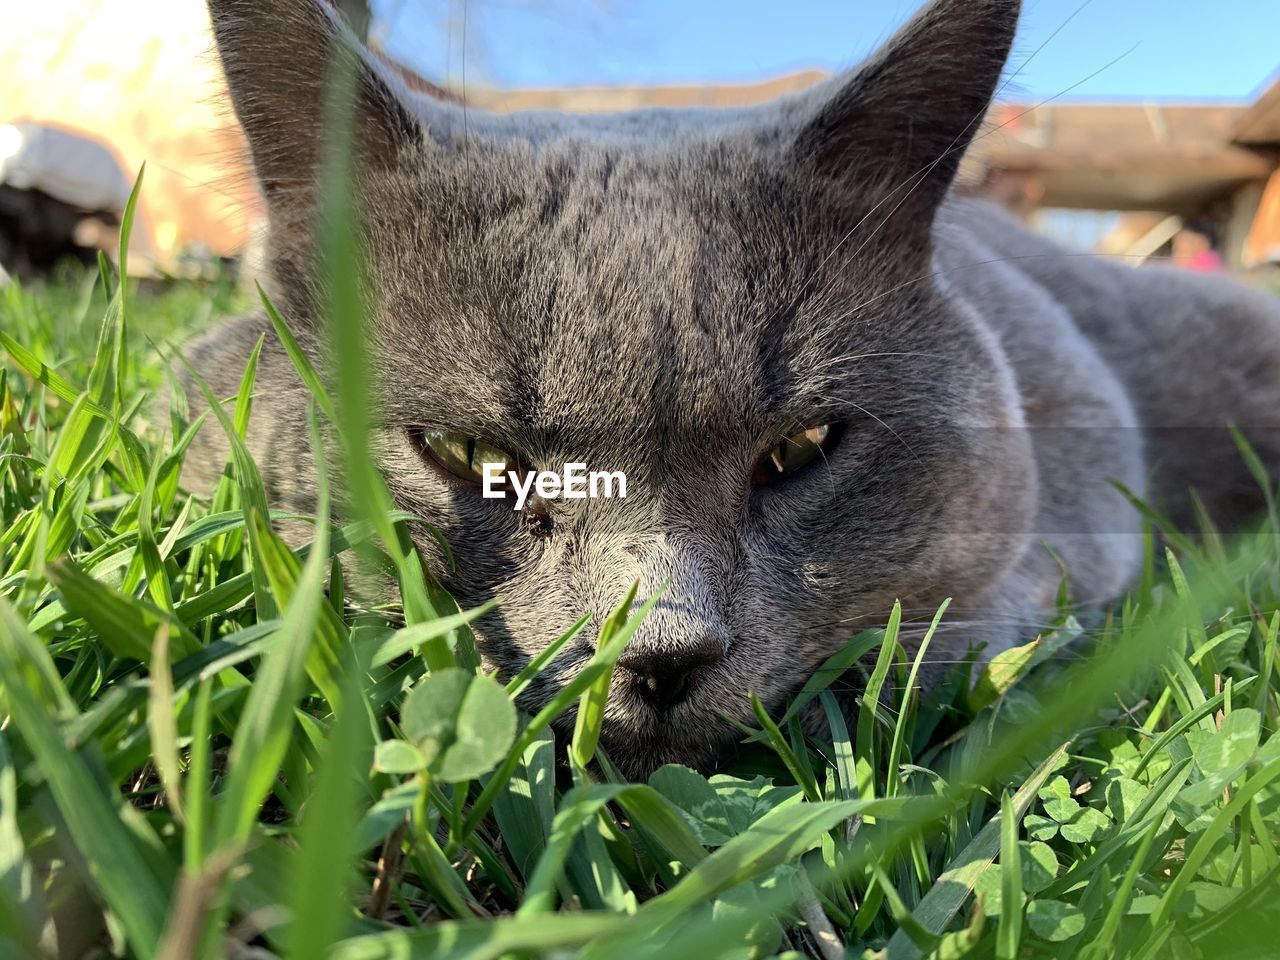 CLOSE-UP OF A CAT RESTING ON GRASS